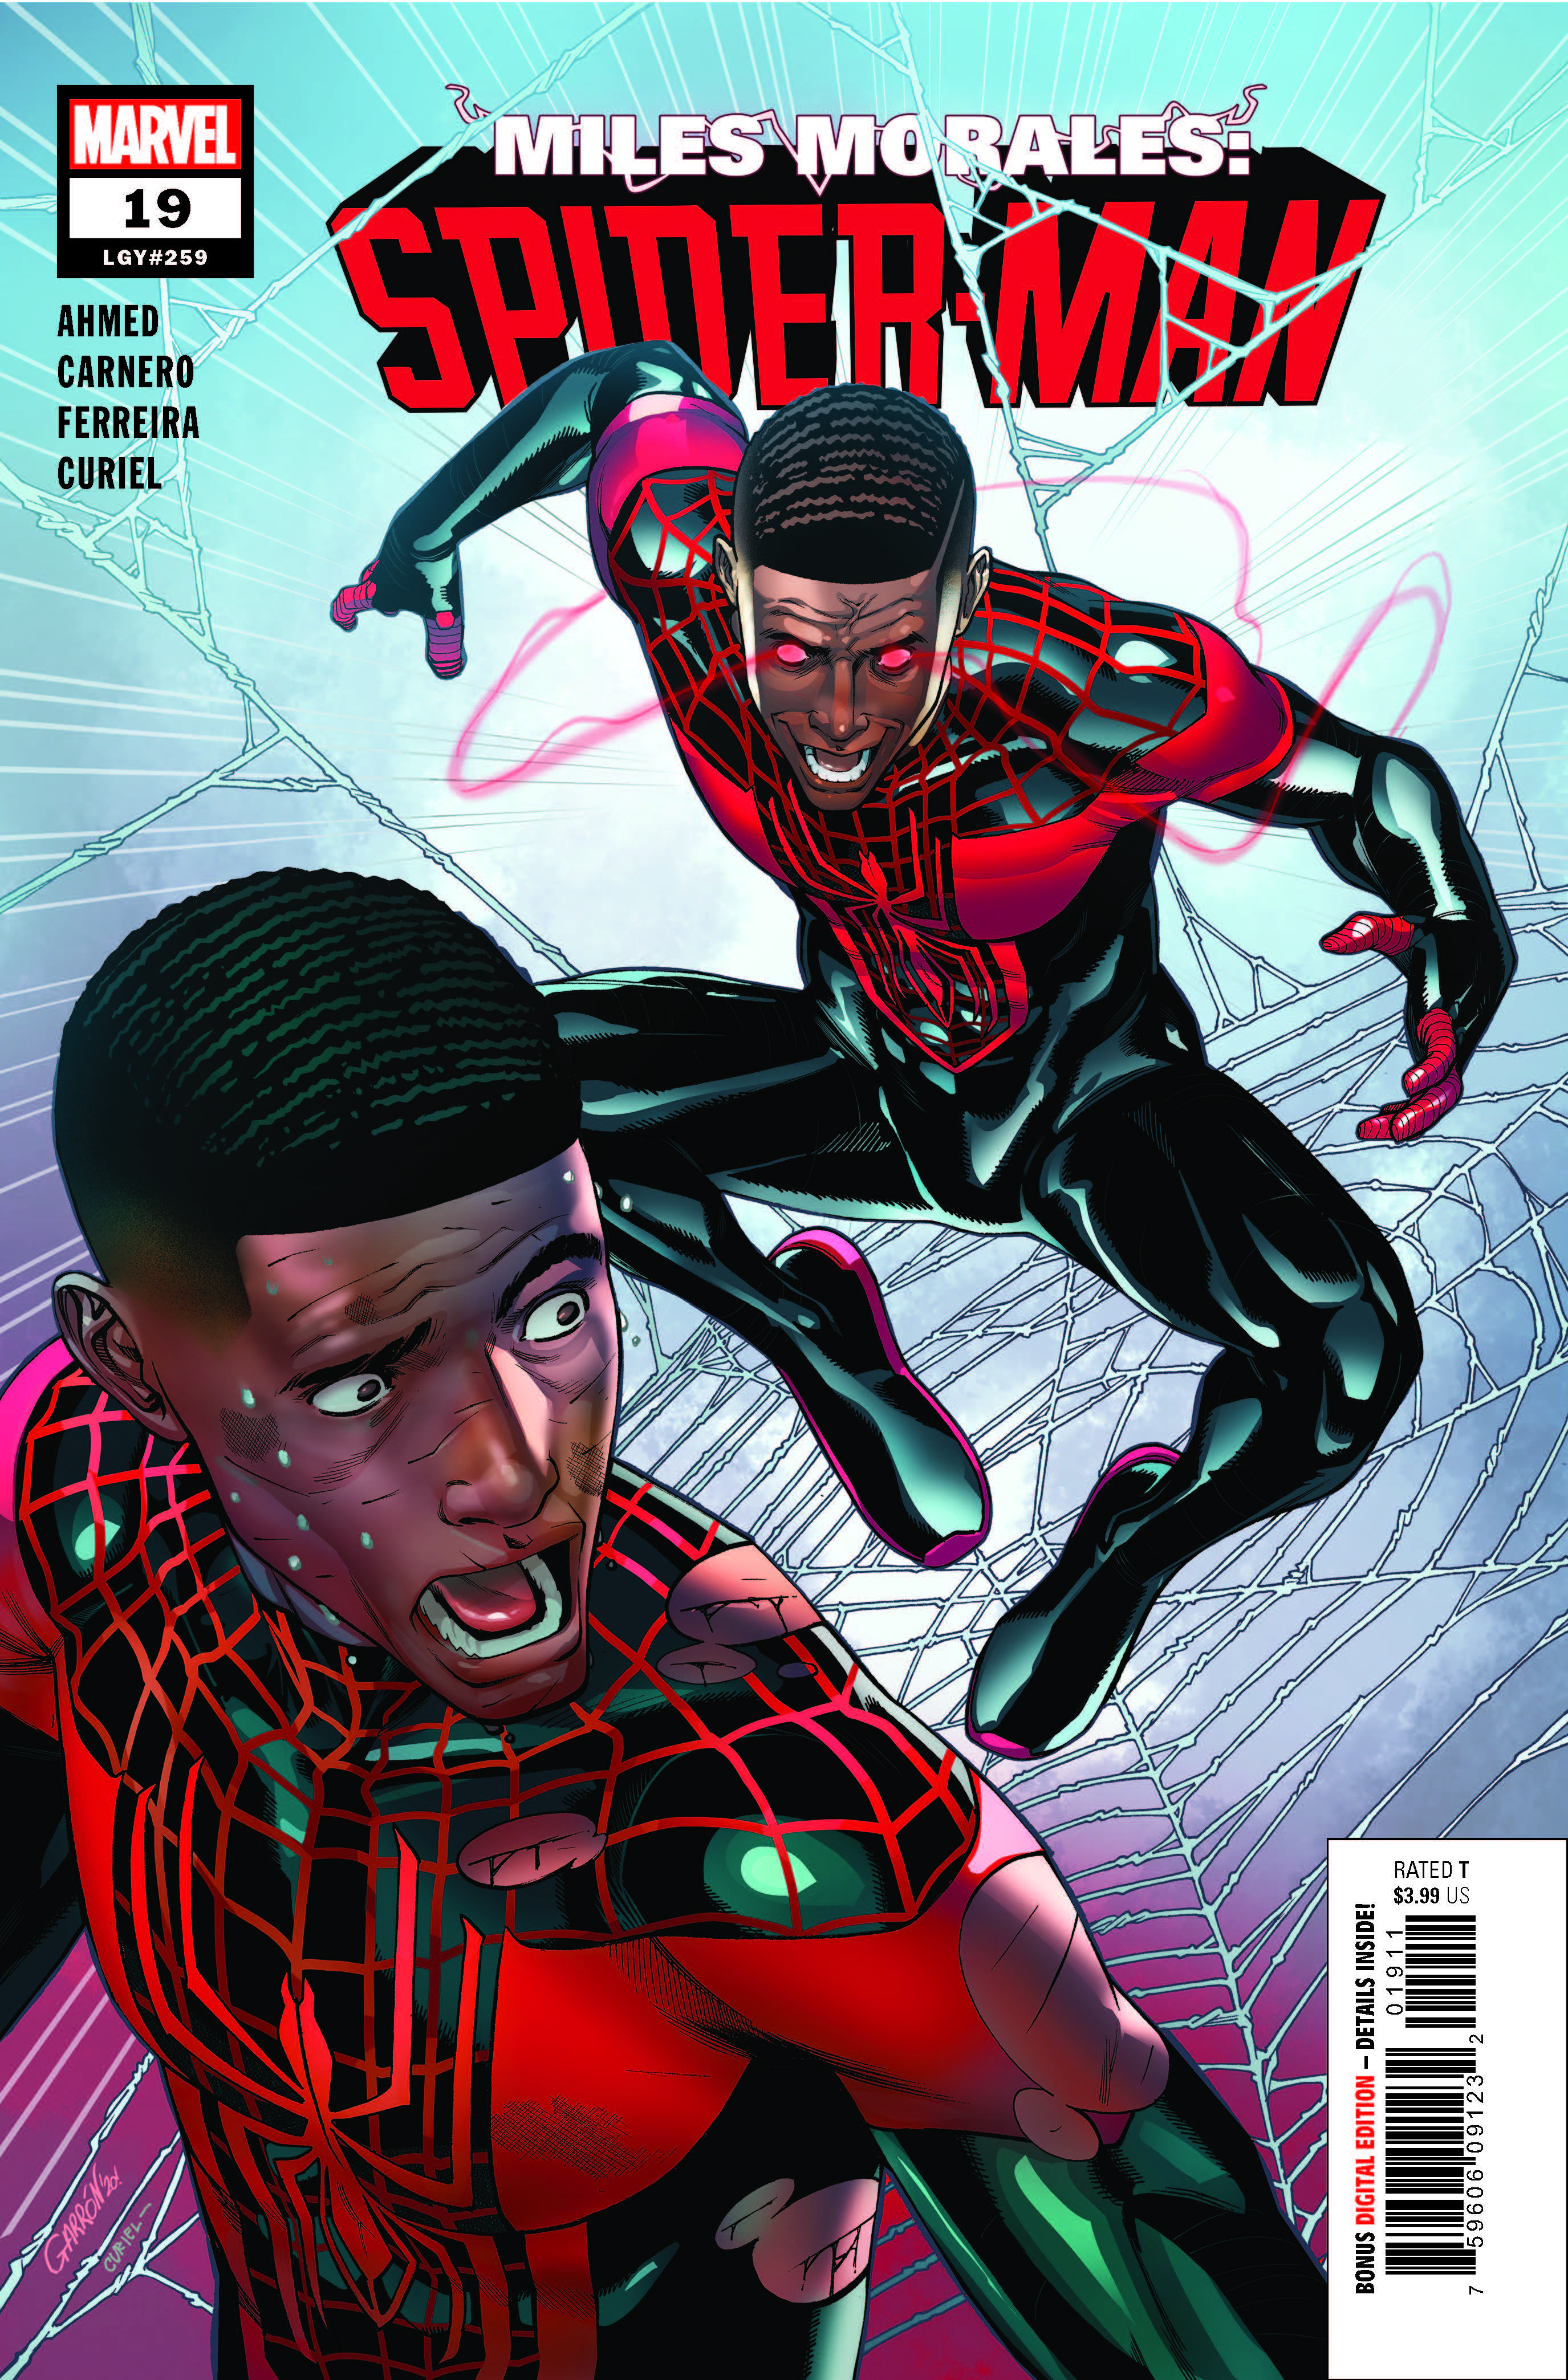 Miles Morales: Spider-Man #19 Out (2019)